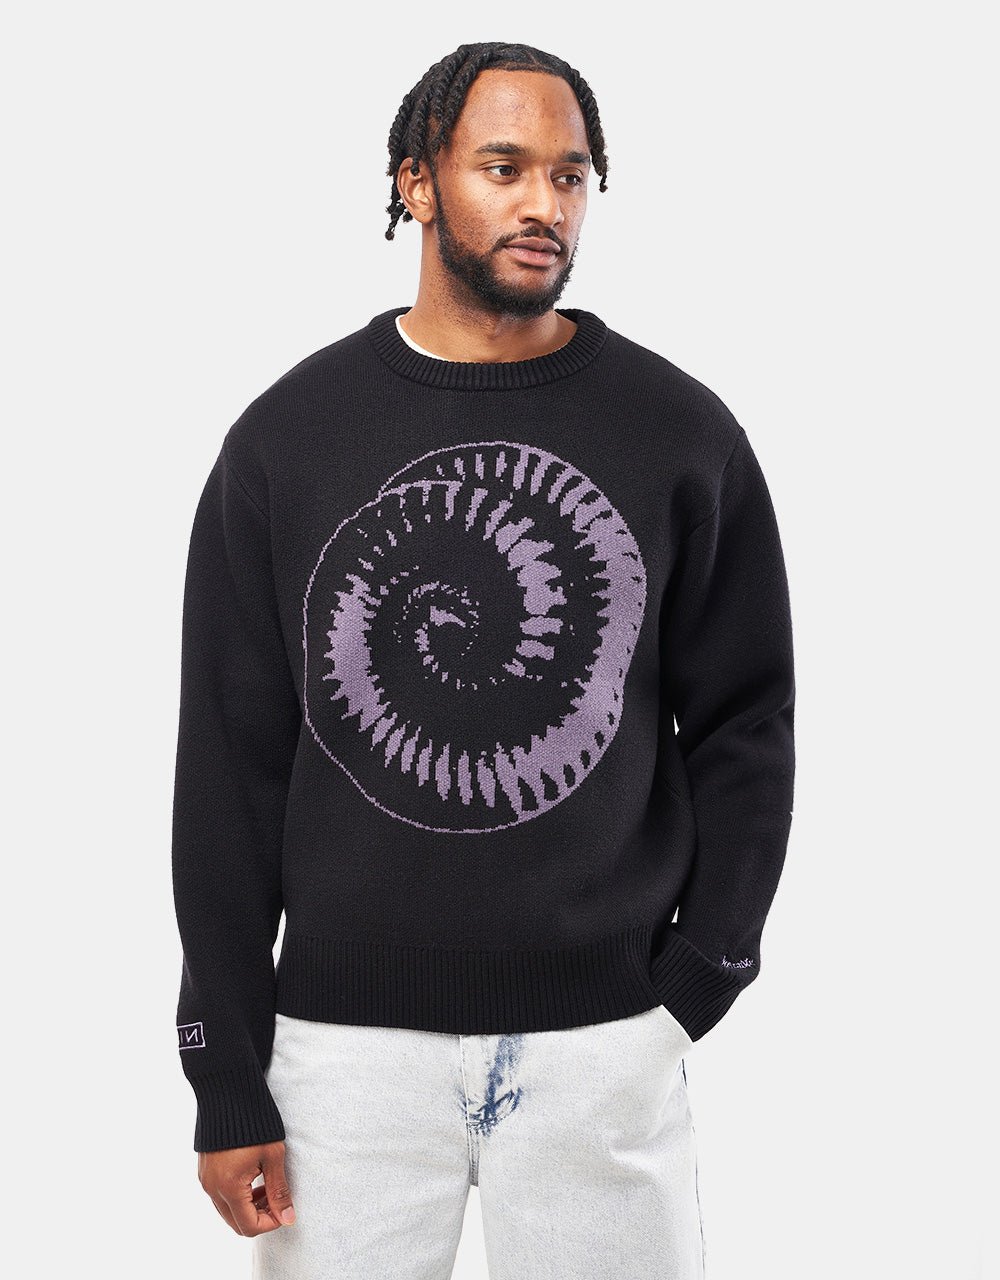 Welcome x Nine Inch Nails Spiral Knit Sweater - Black